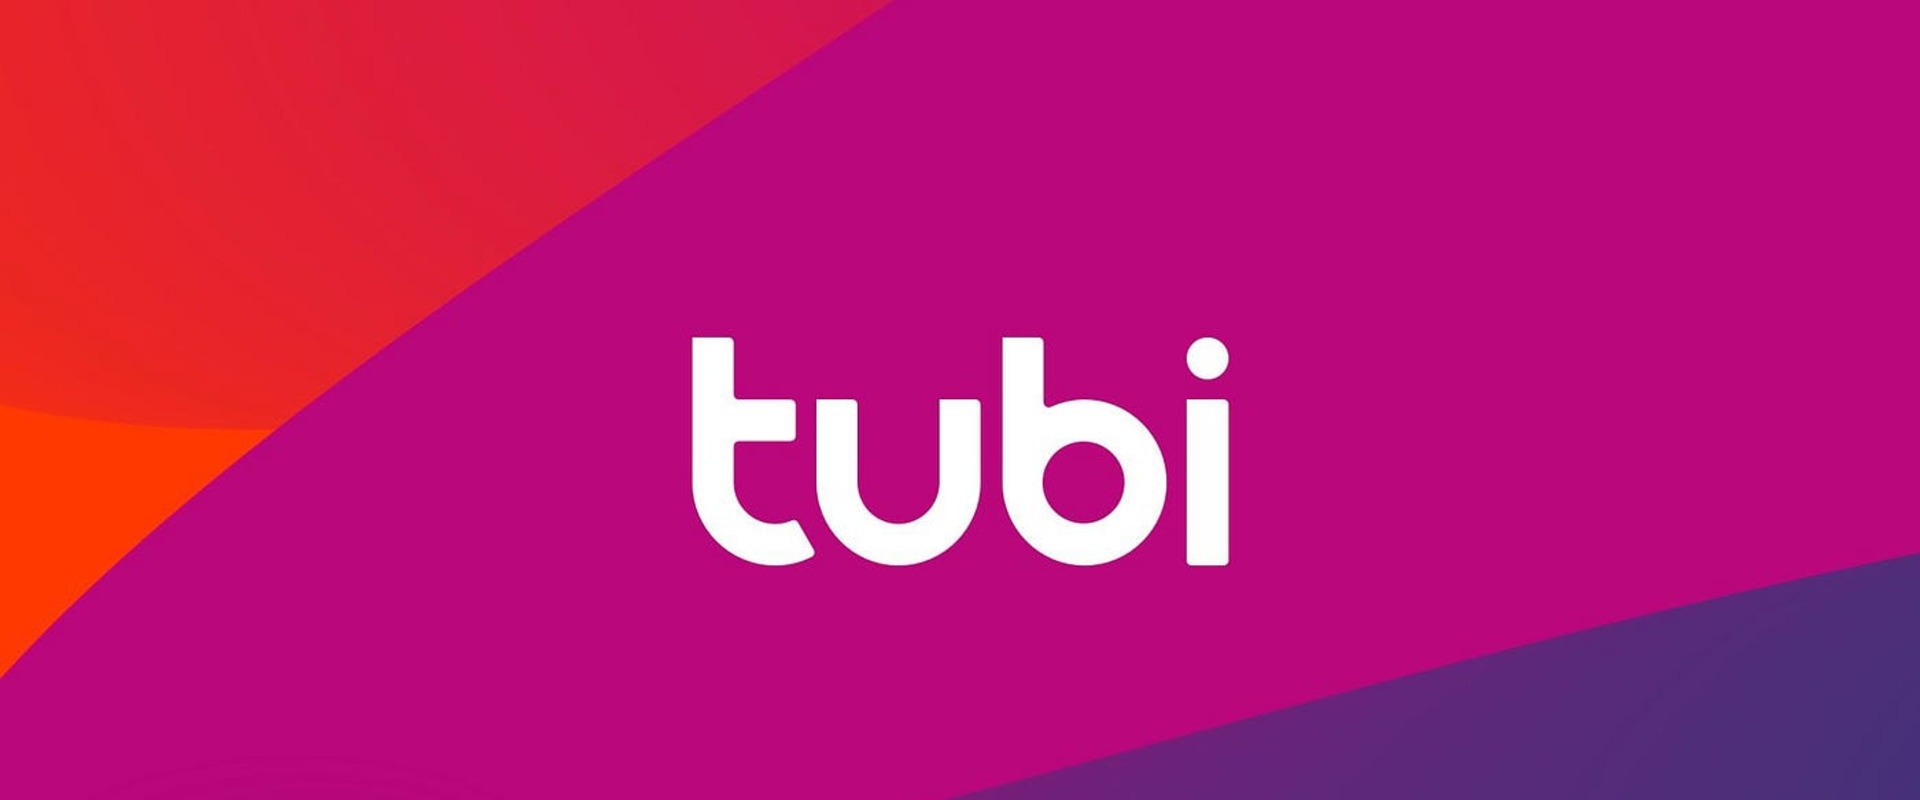 Tubi TV: All You Need to Know